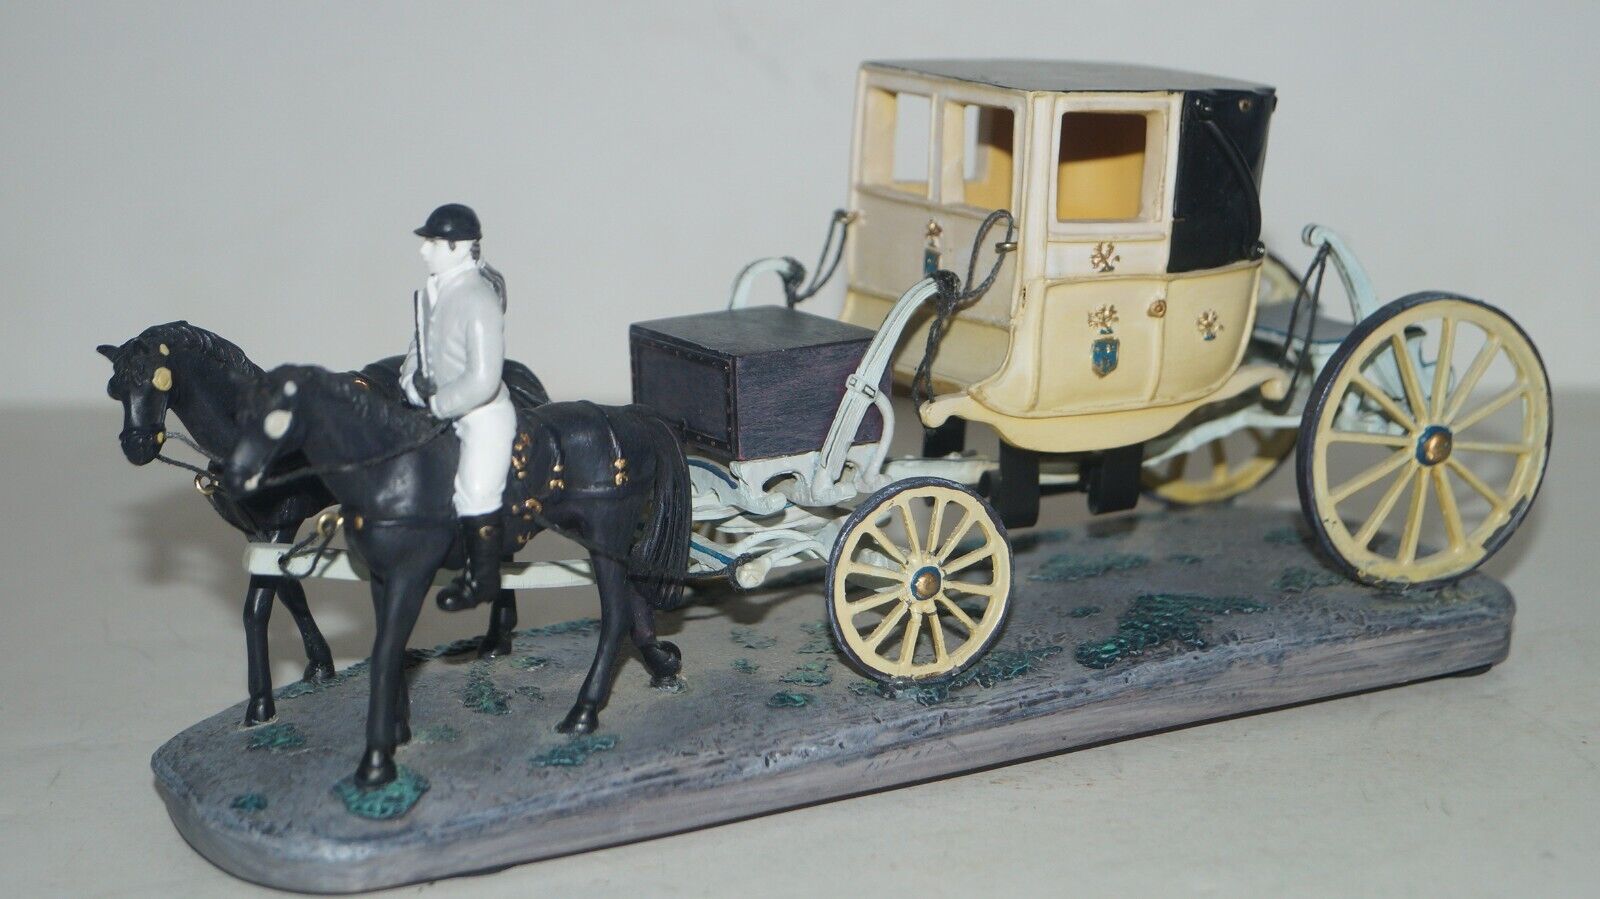 2005 LANG & WISE COLONIAL WILLIAMSBURG WYTHE HORSE CARRIAGE No. 0506020 FIGURINE